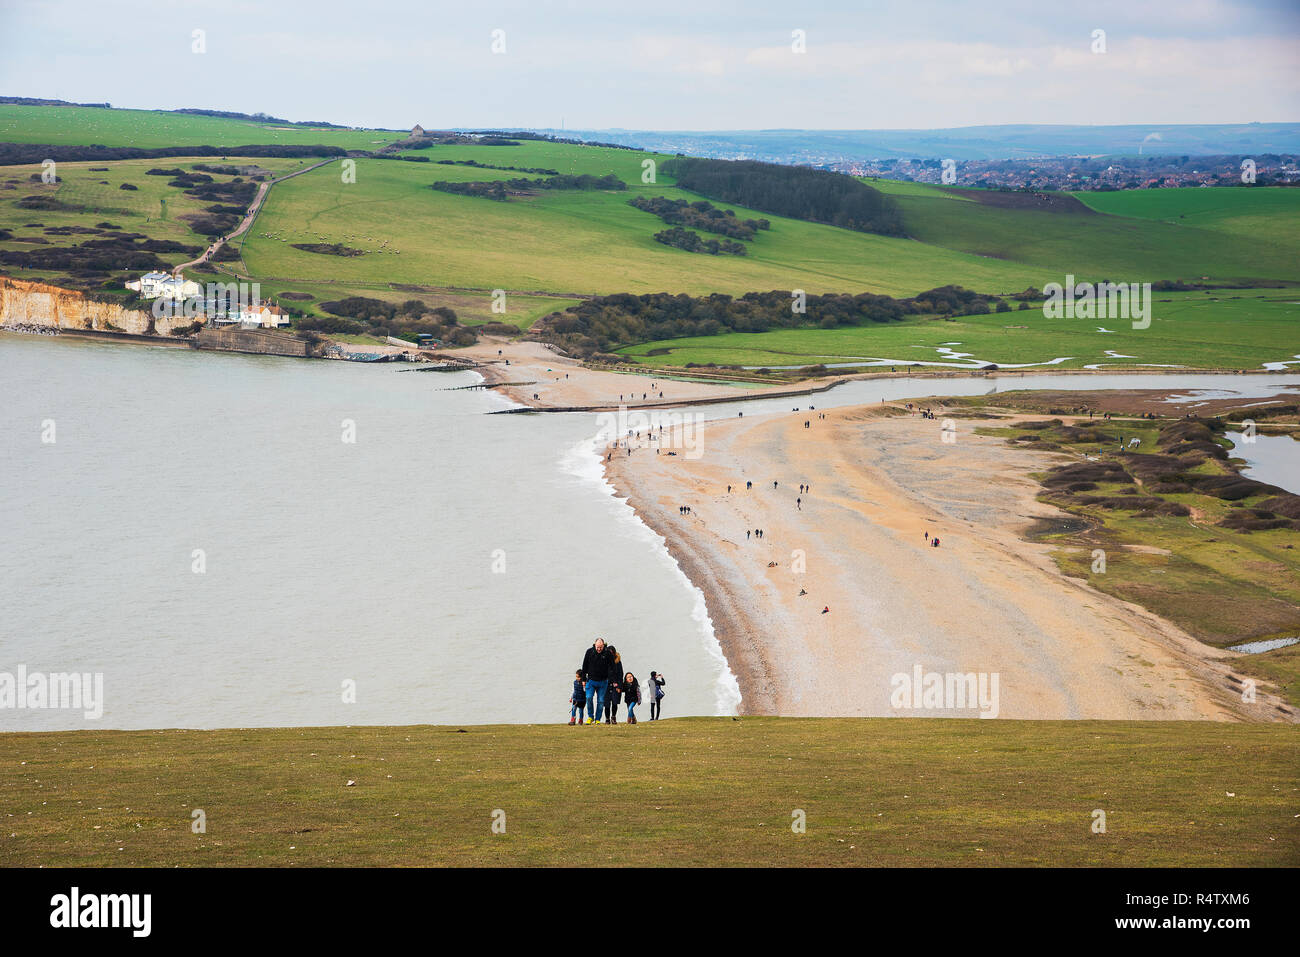 A view looking over a  beach from the South Downs Way near Eastbourne   England UK. Stock Photo